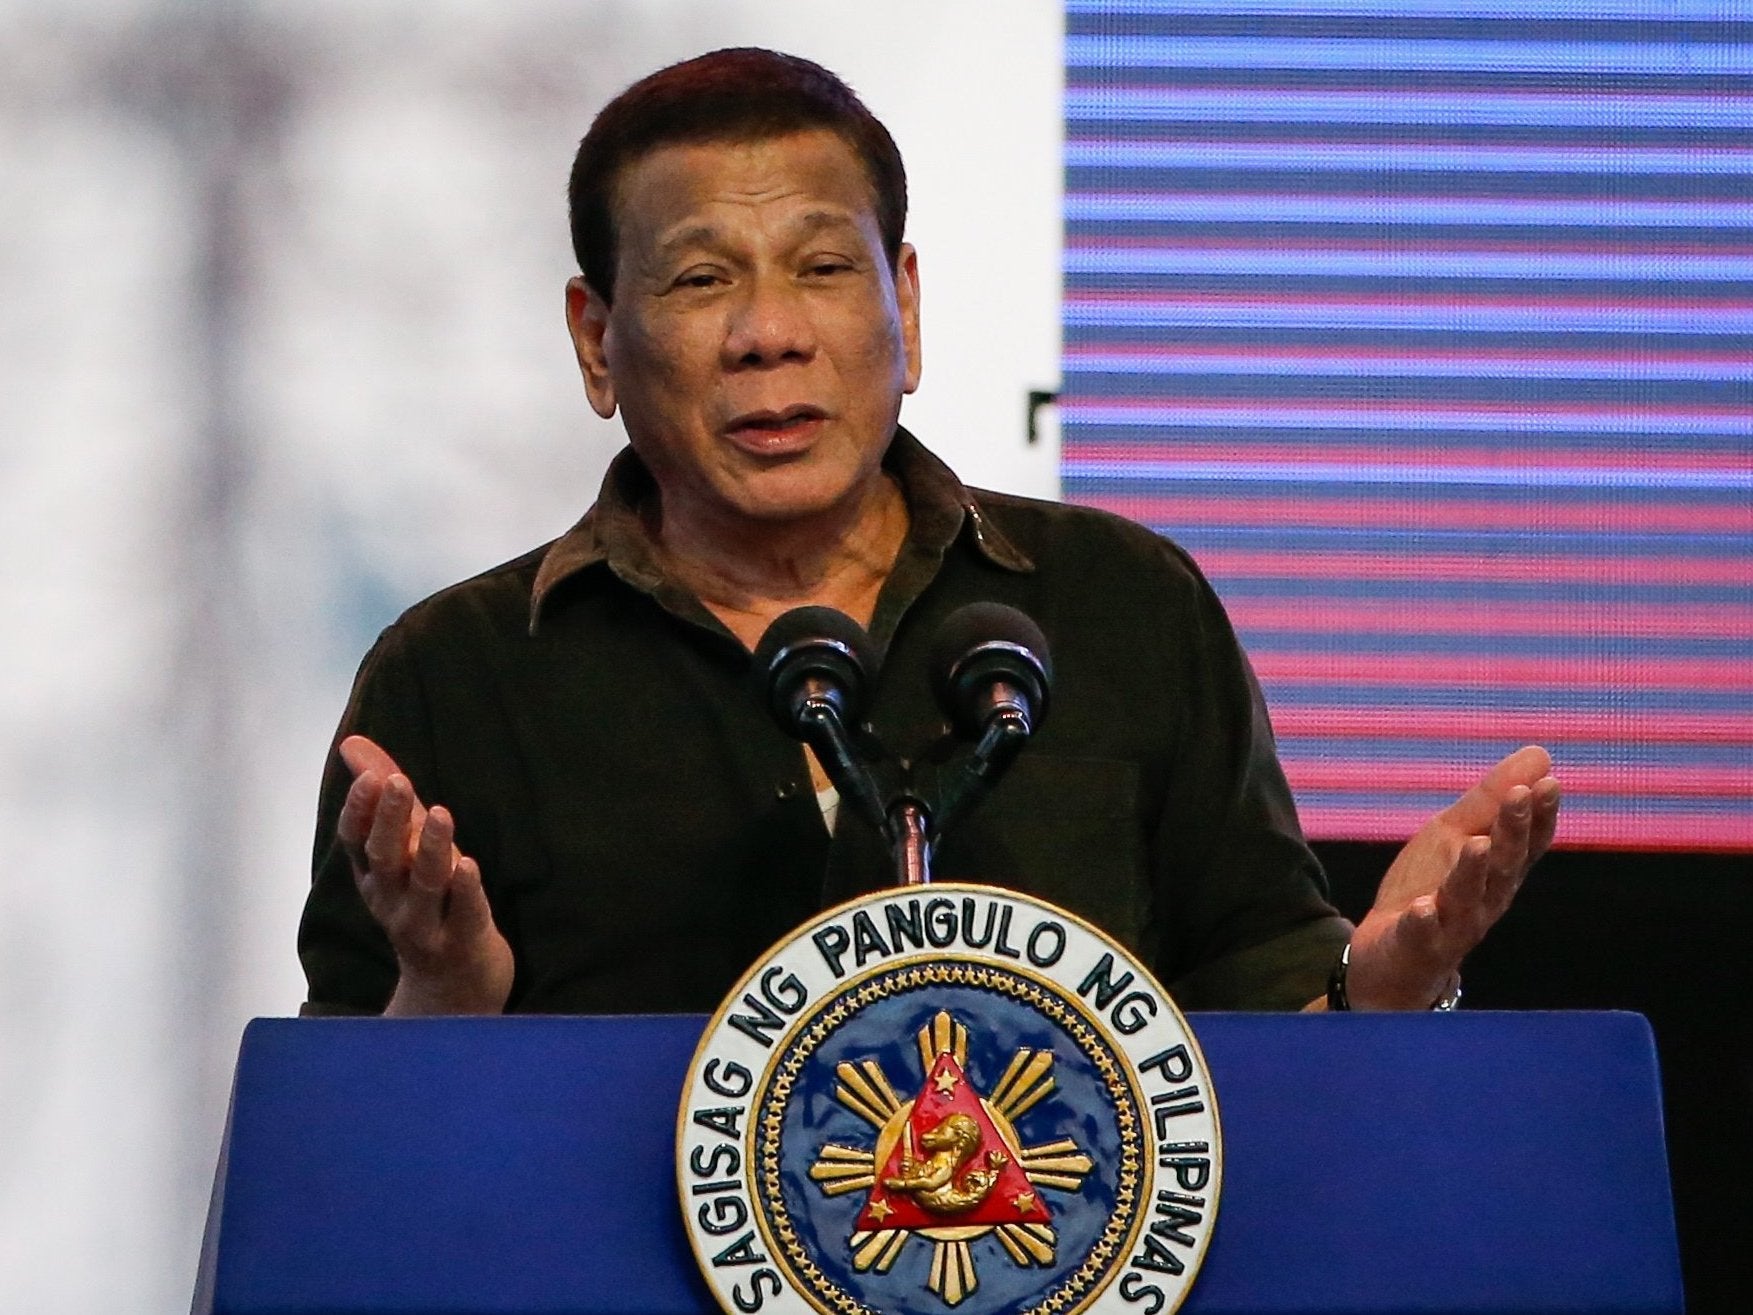 Thitu Island: Duterte warns he will send troops on 'suicide mission' if China threatens disputed territory